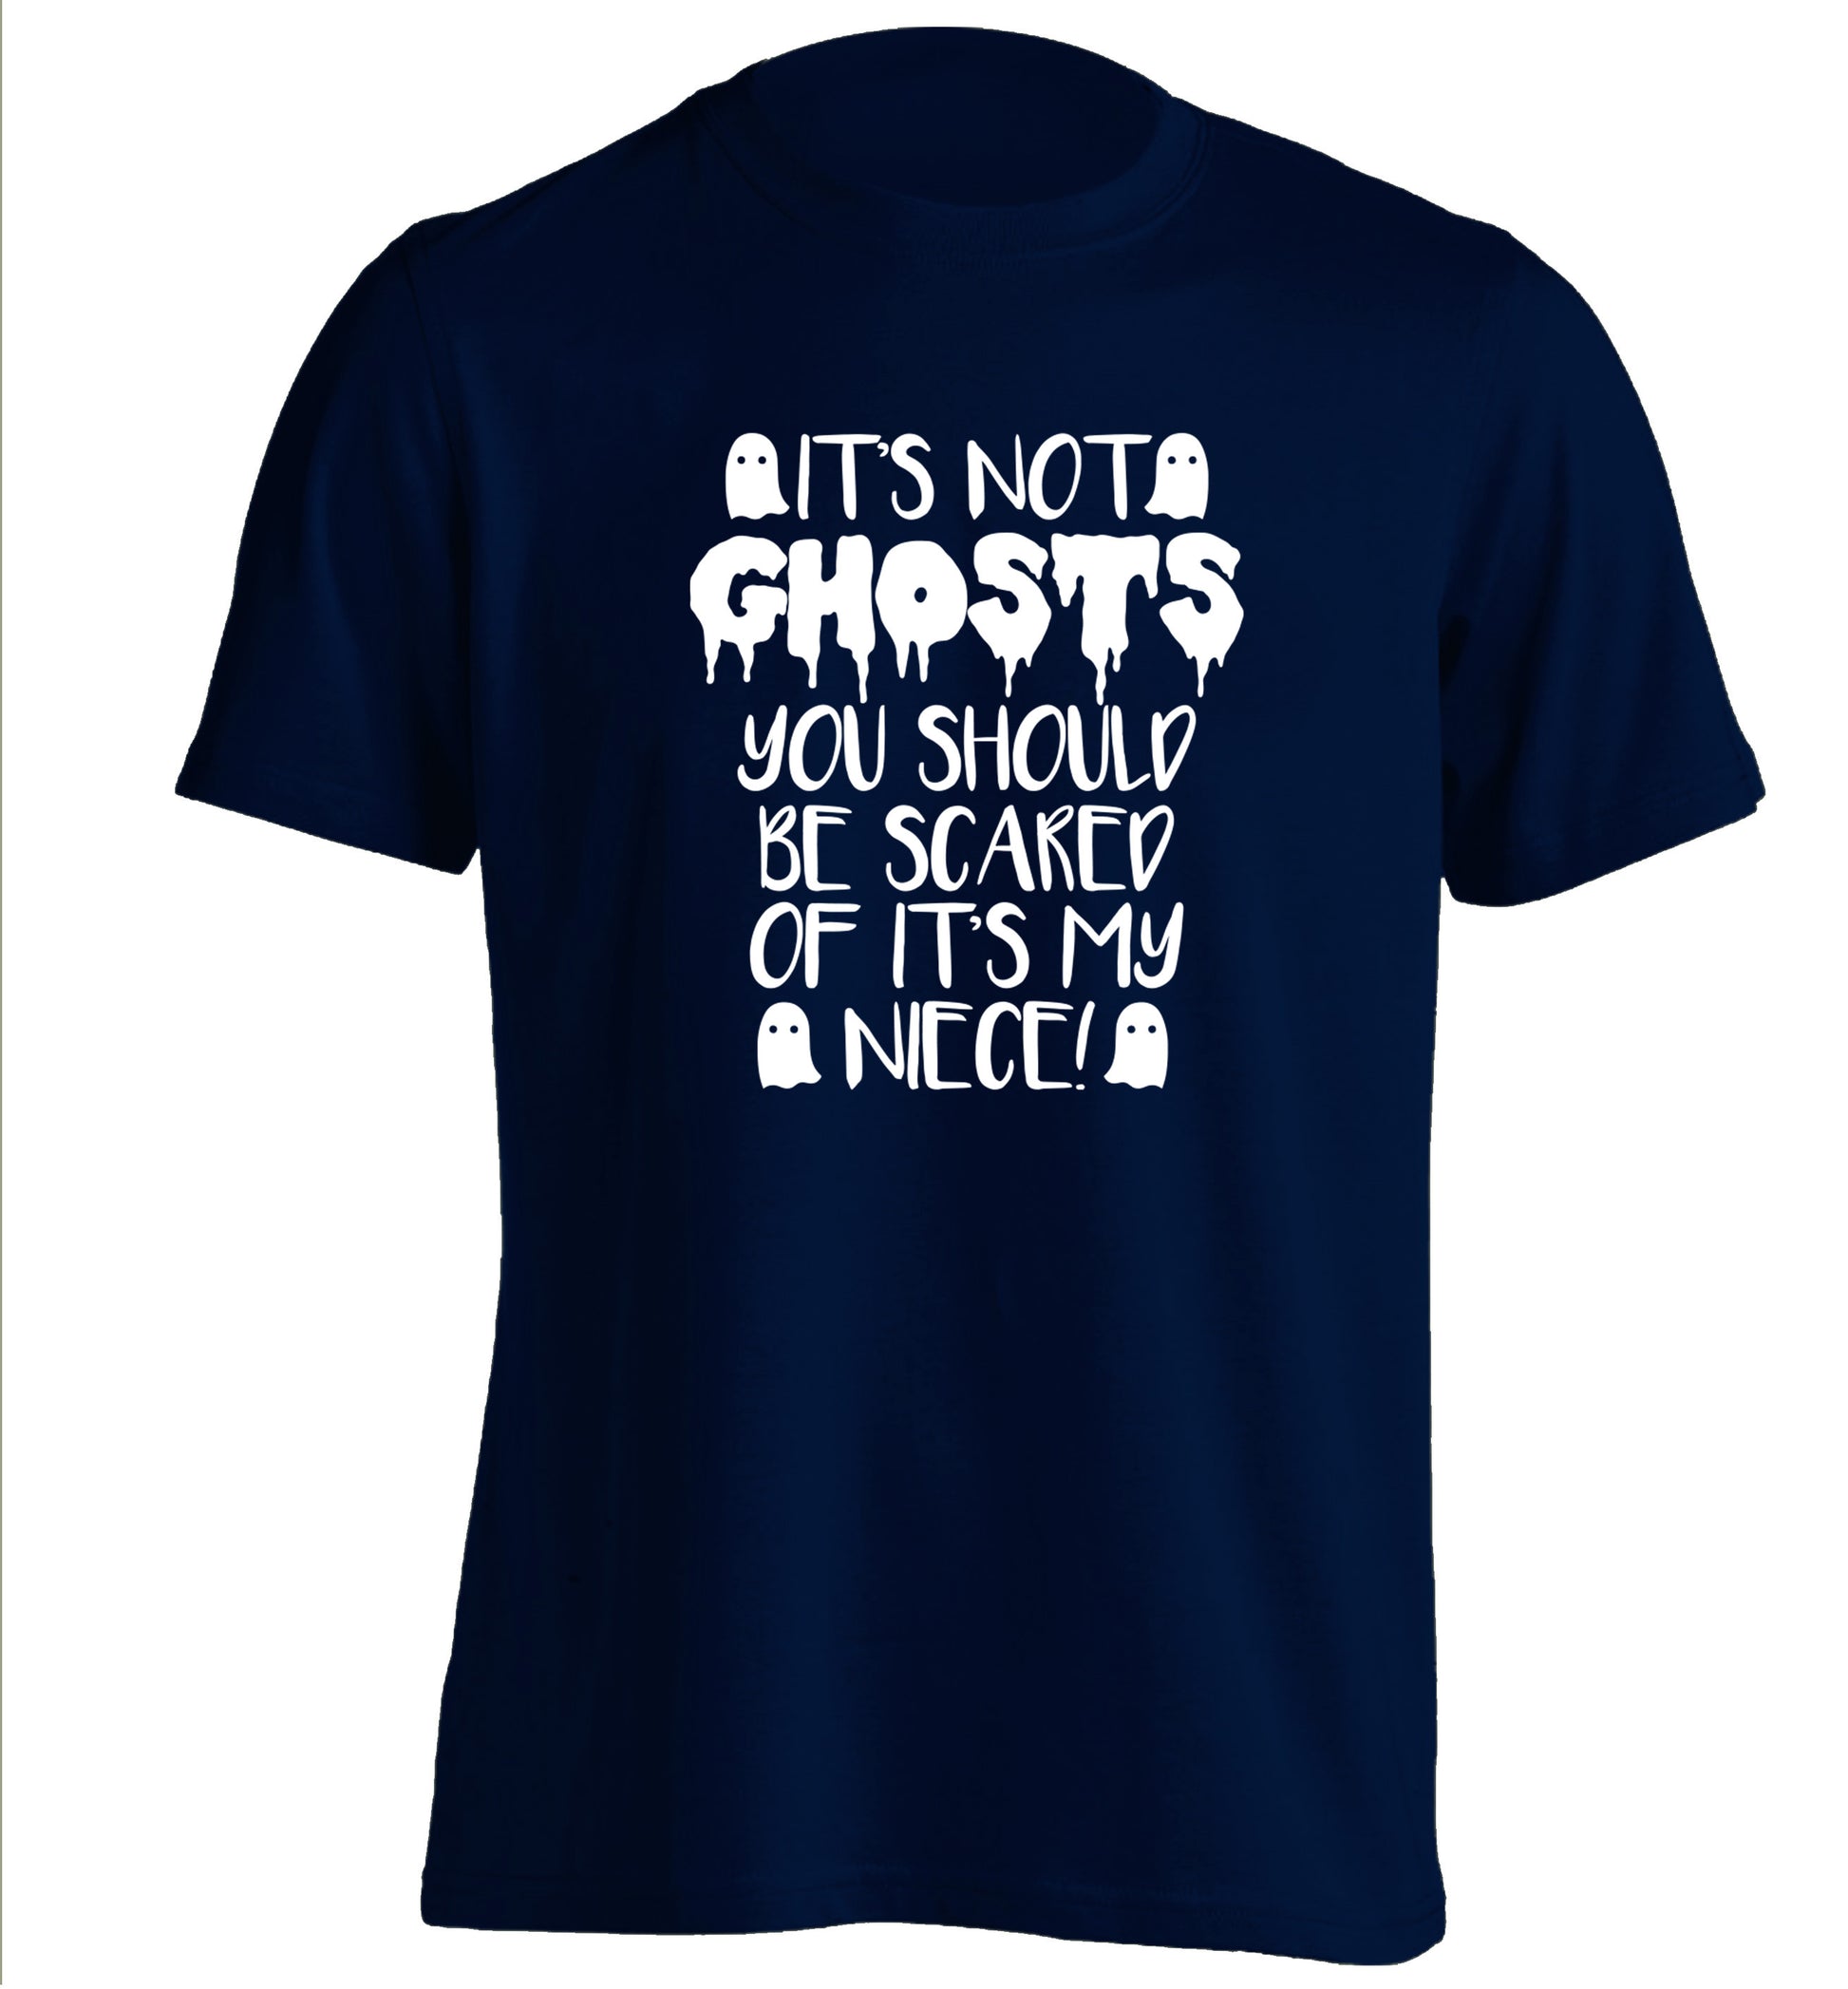 It's not ghosts you should be scared of it's my niece! adults unisex navy Tshirt 2XL